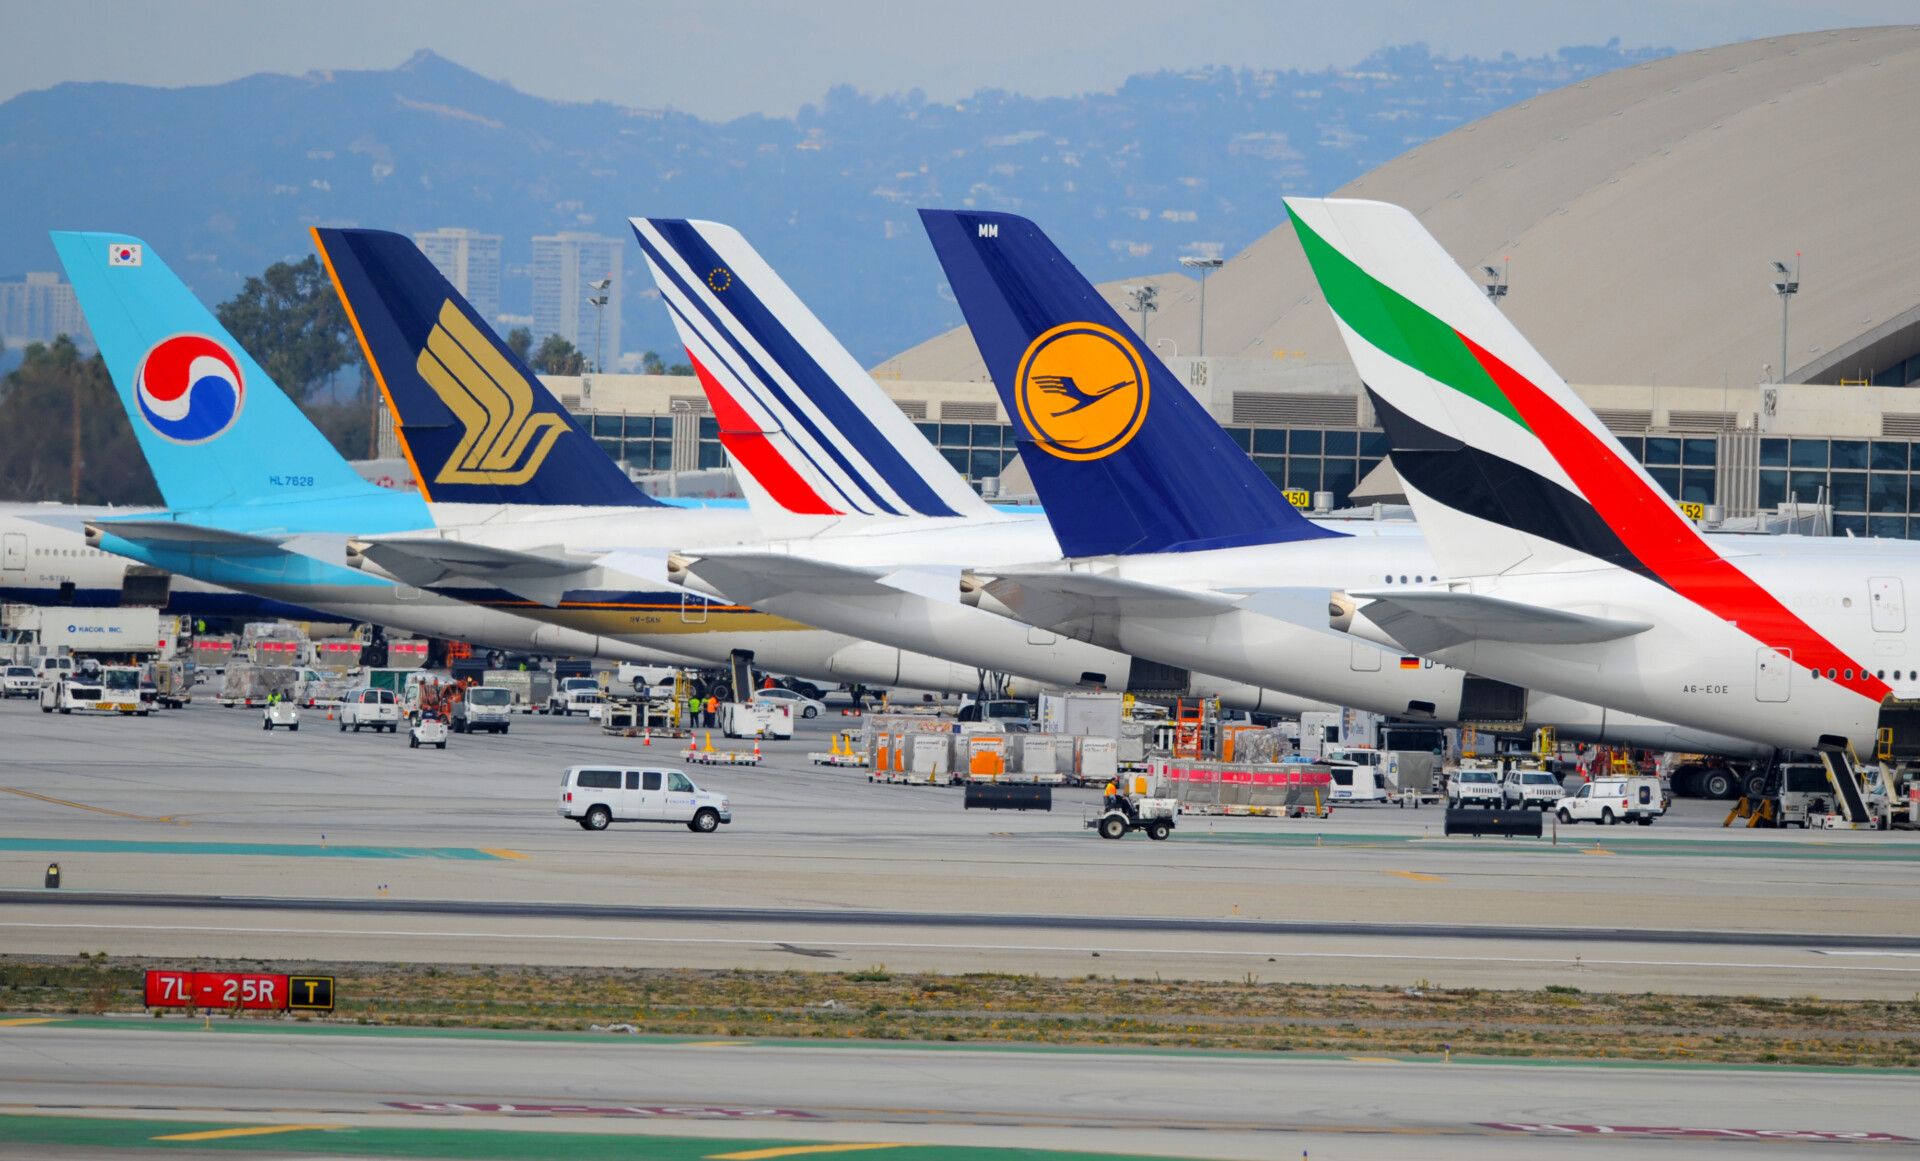 Aircraft tails of Korean Air, Singapore Airlines, Air France, Lufthansa, and Emirates.